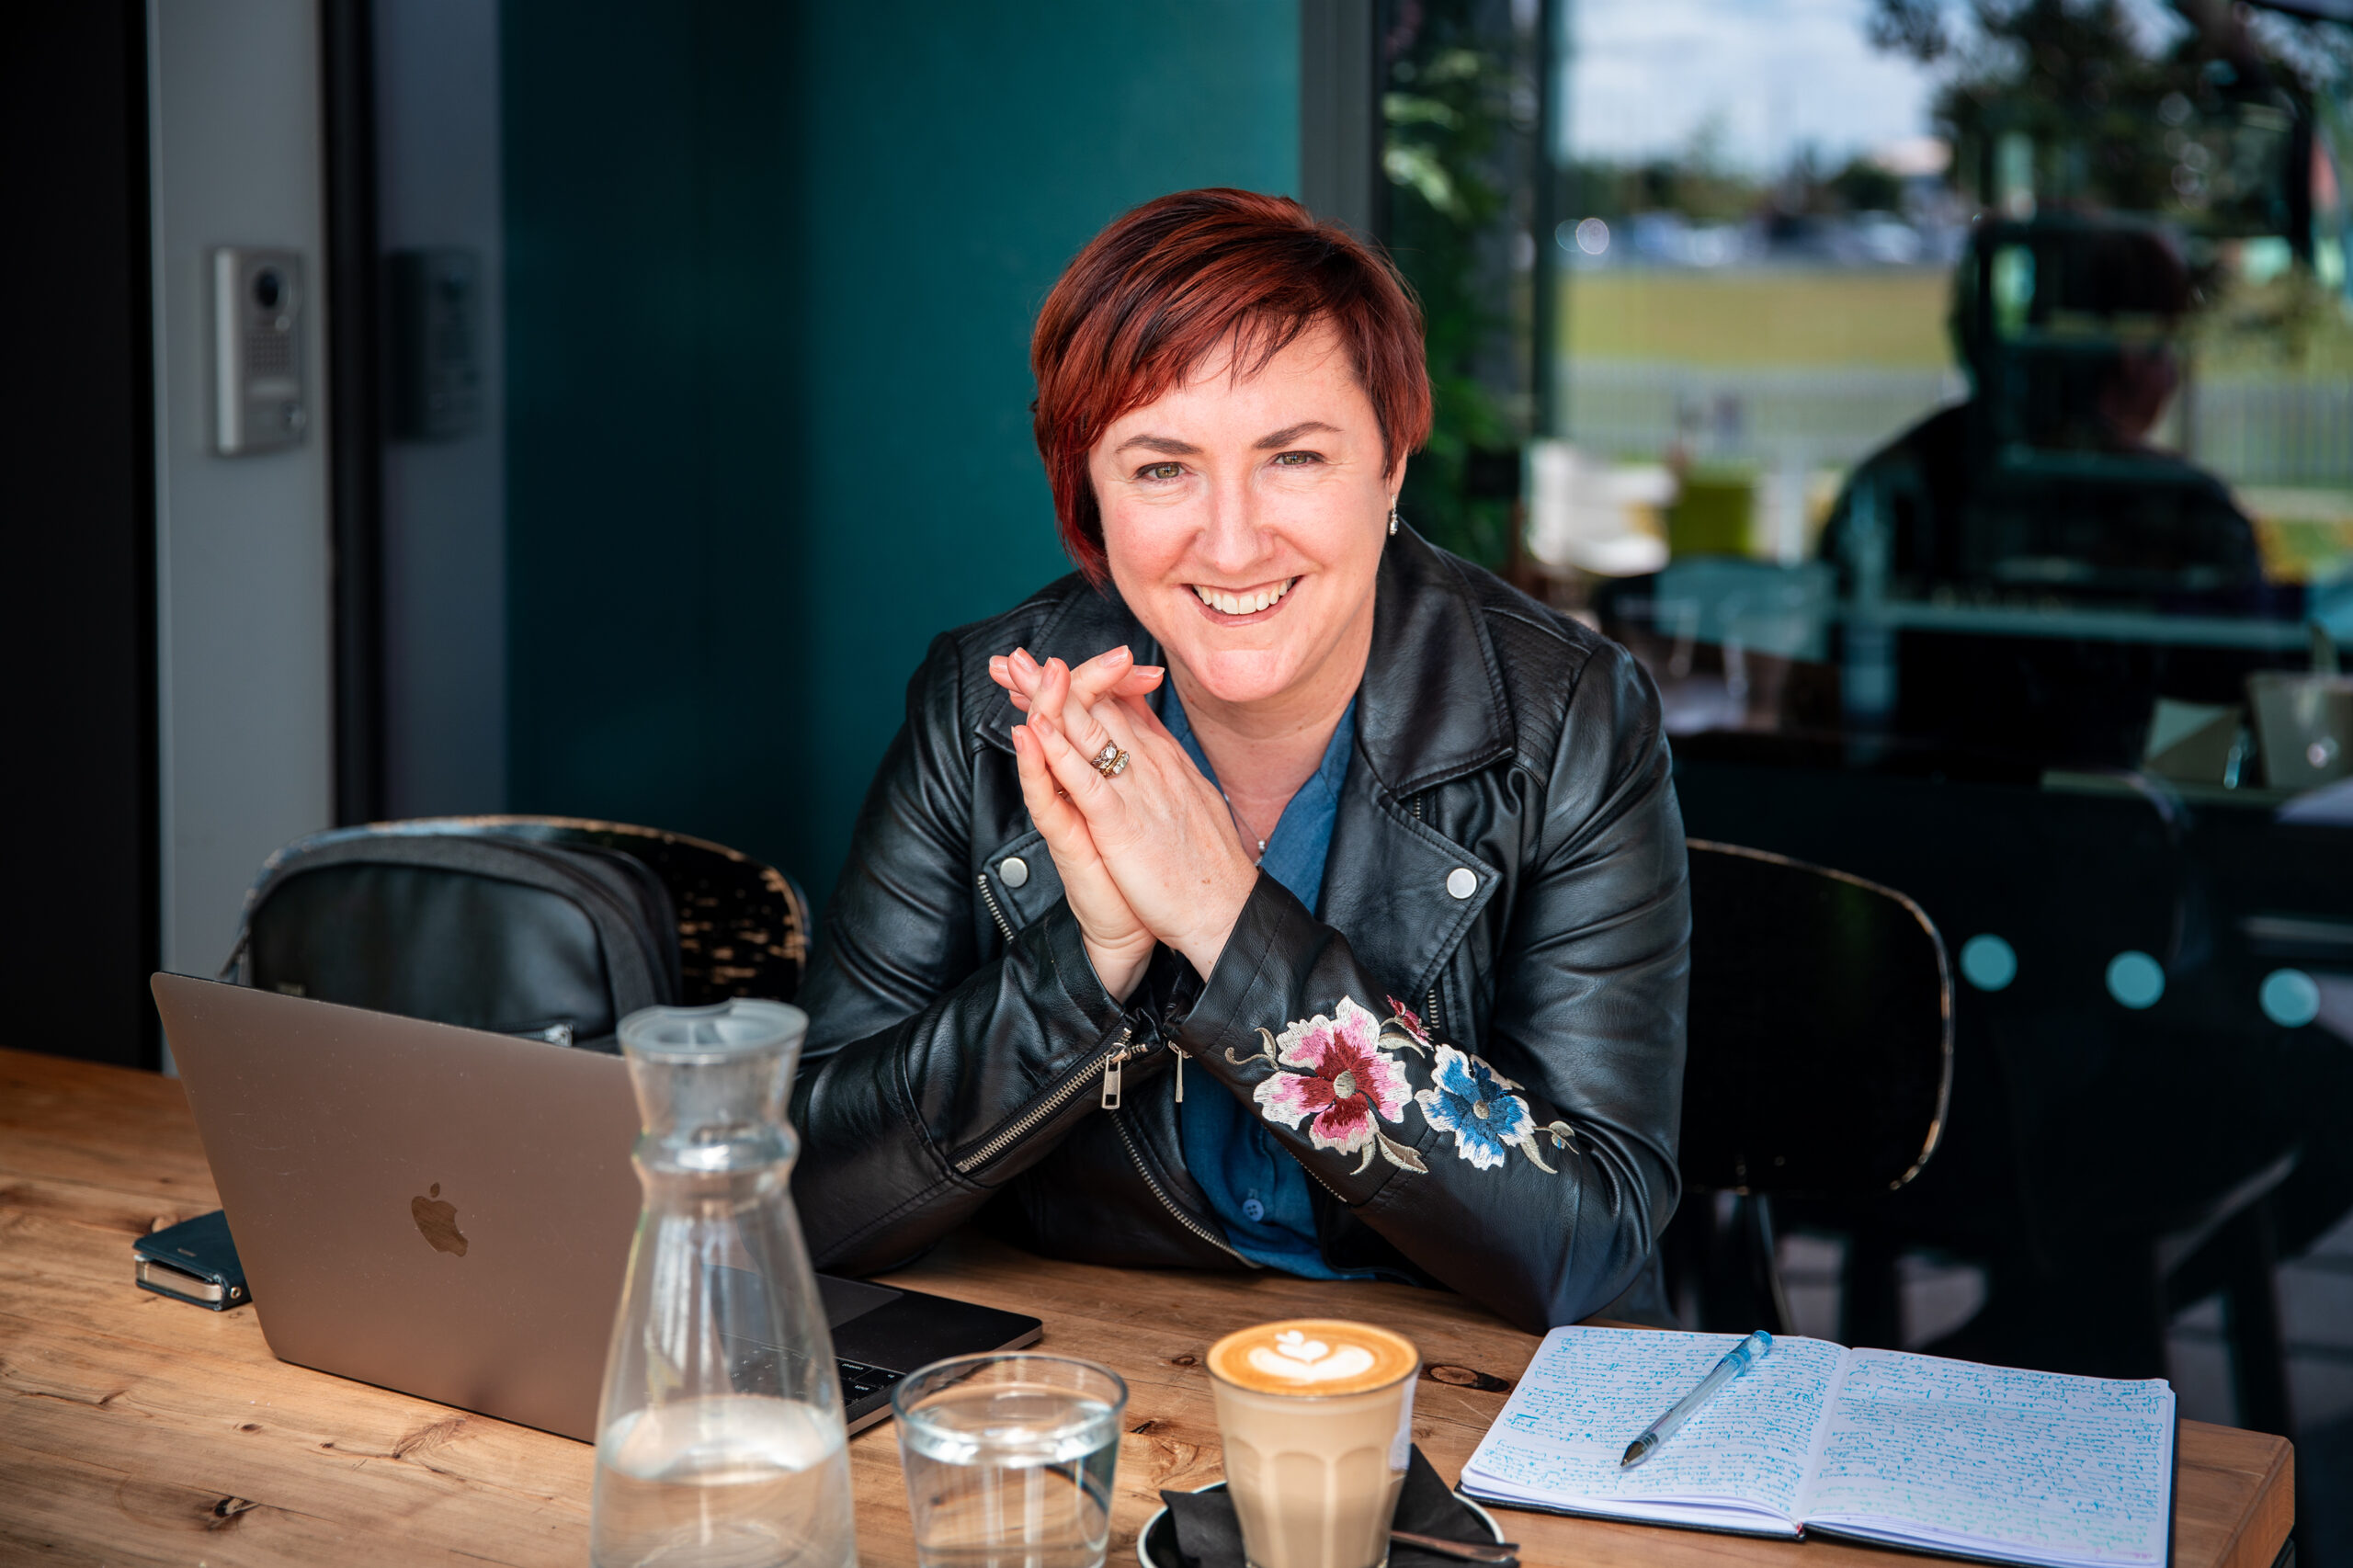 Kerrie sits in a cafe at a wooden table with her hands together. She wears a black leather jacket with floral embroidery on the left sleeve. On the table in front of her is a laptop, pen on top of a journal, cup of coffee and a carafe and glass of water.